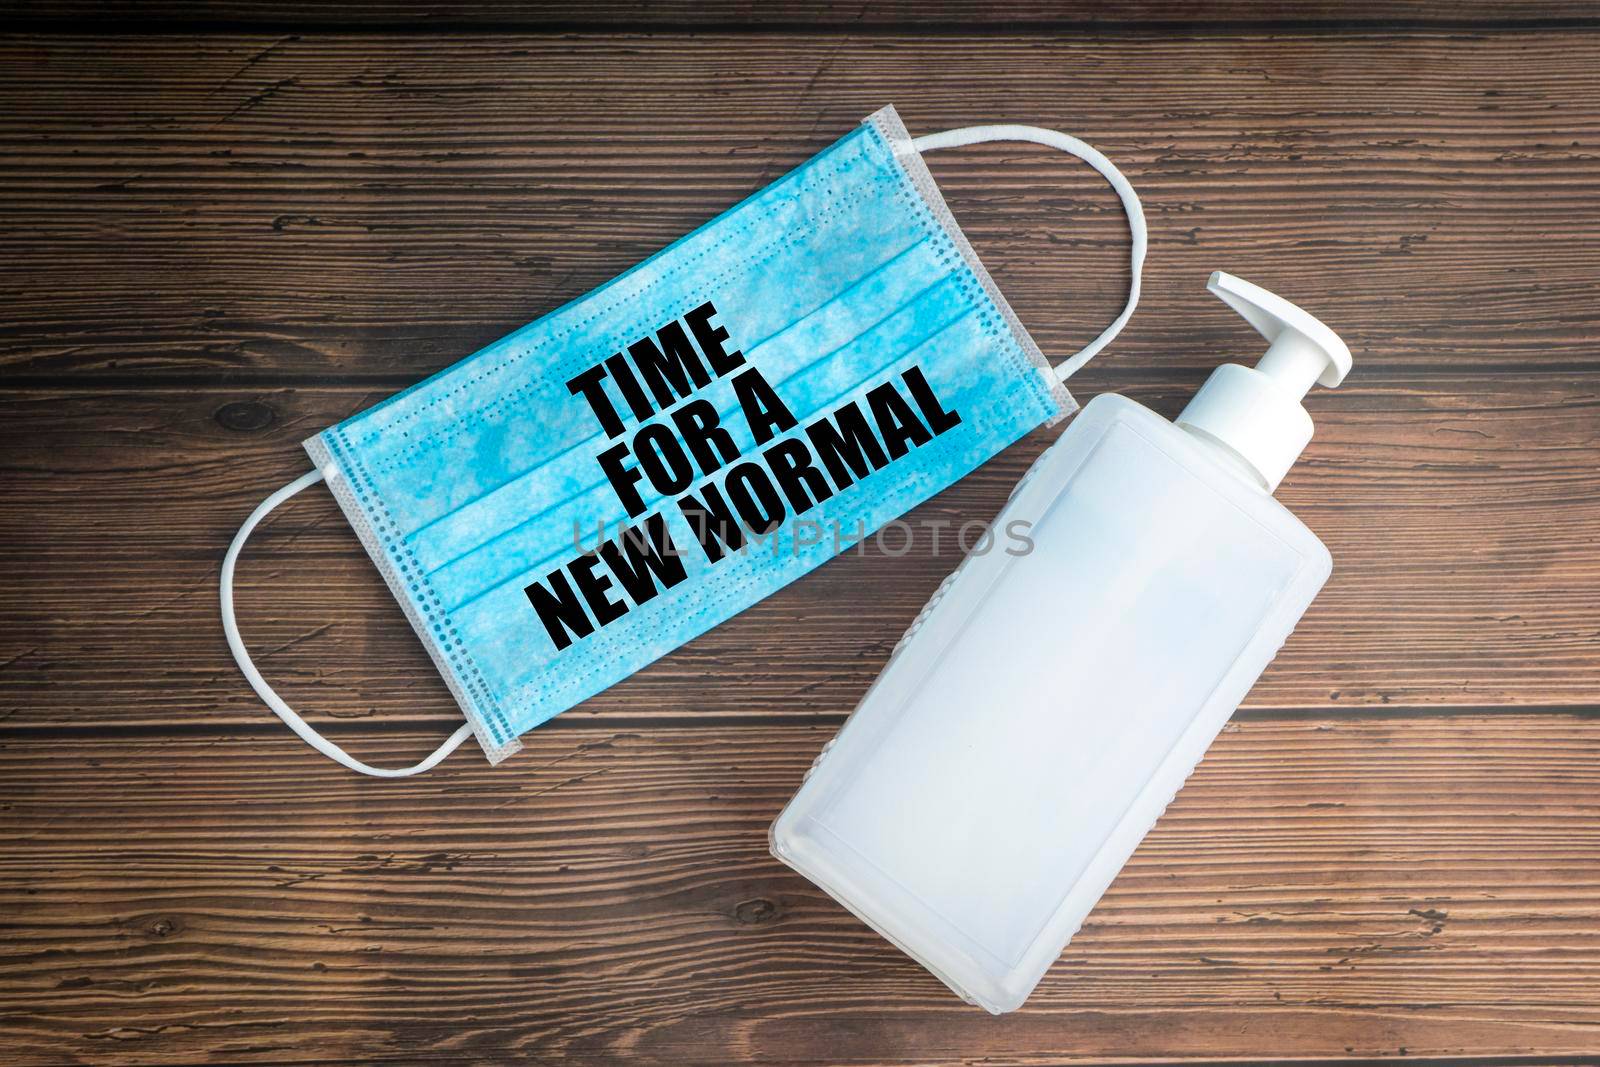 TIME FOR A NEW NORMAL text with safety face mask and hand sanitizer on wooden background by silverwings